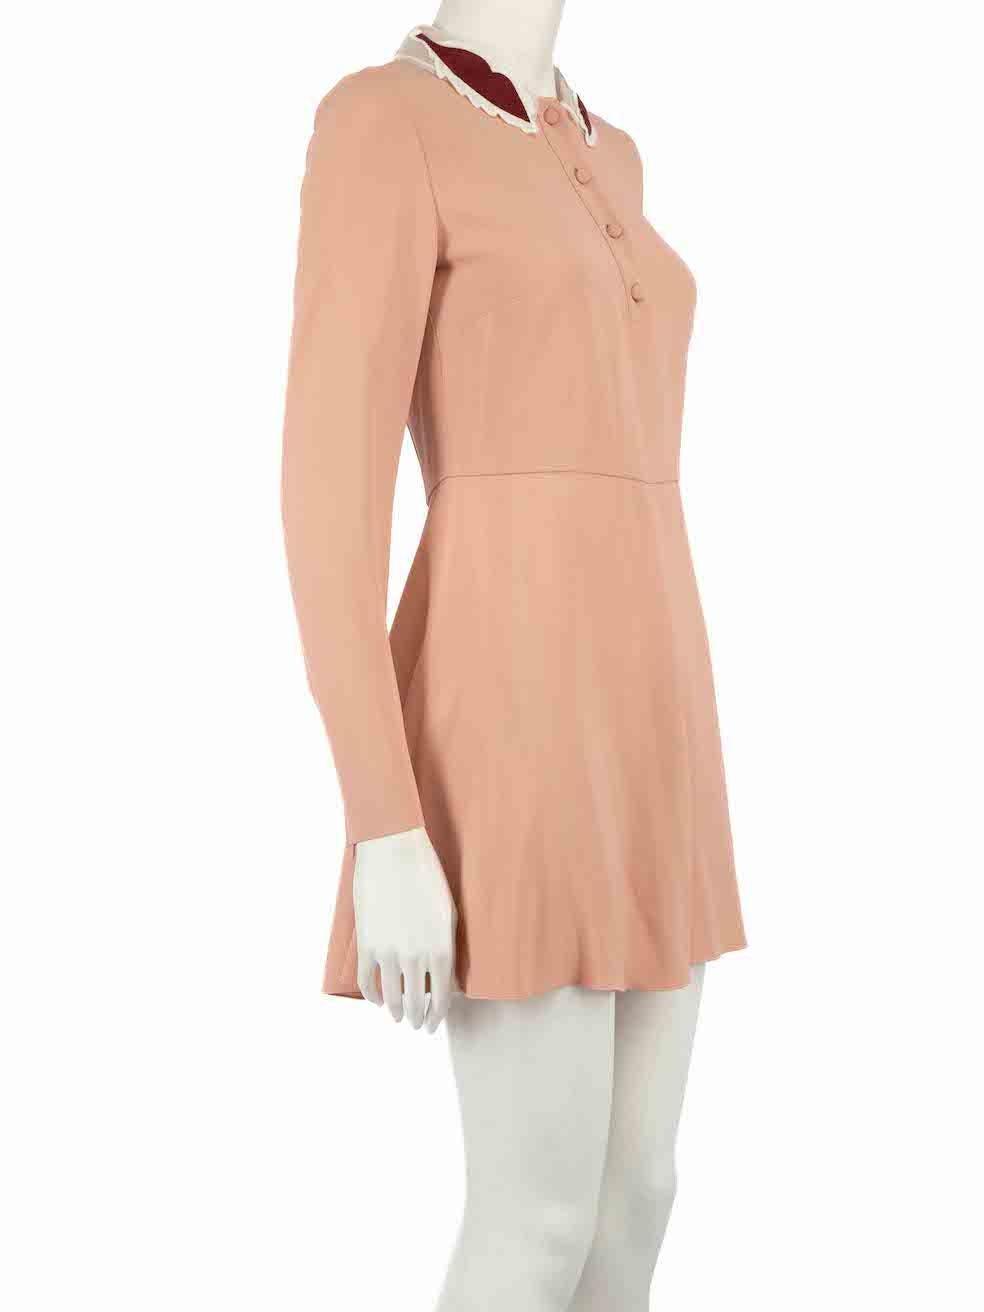 CONDITION is Very good. Minimal wear to dress is evident. Minimal wear to the rear with marks to the left on this used Red Valentino designer resale item.
 
 
 
 Details
 
 
 Pink
 
 Synthetic
 
 Dress
 
 Leaf collar detail
 
 Long sleeves
 
 Button